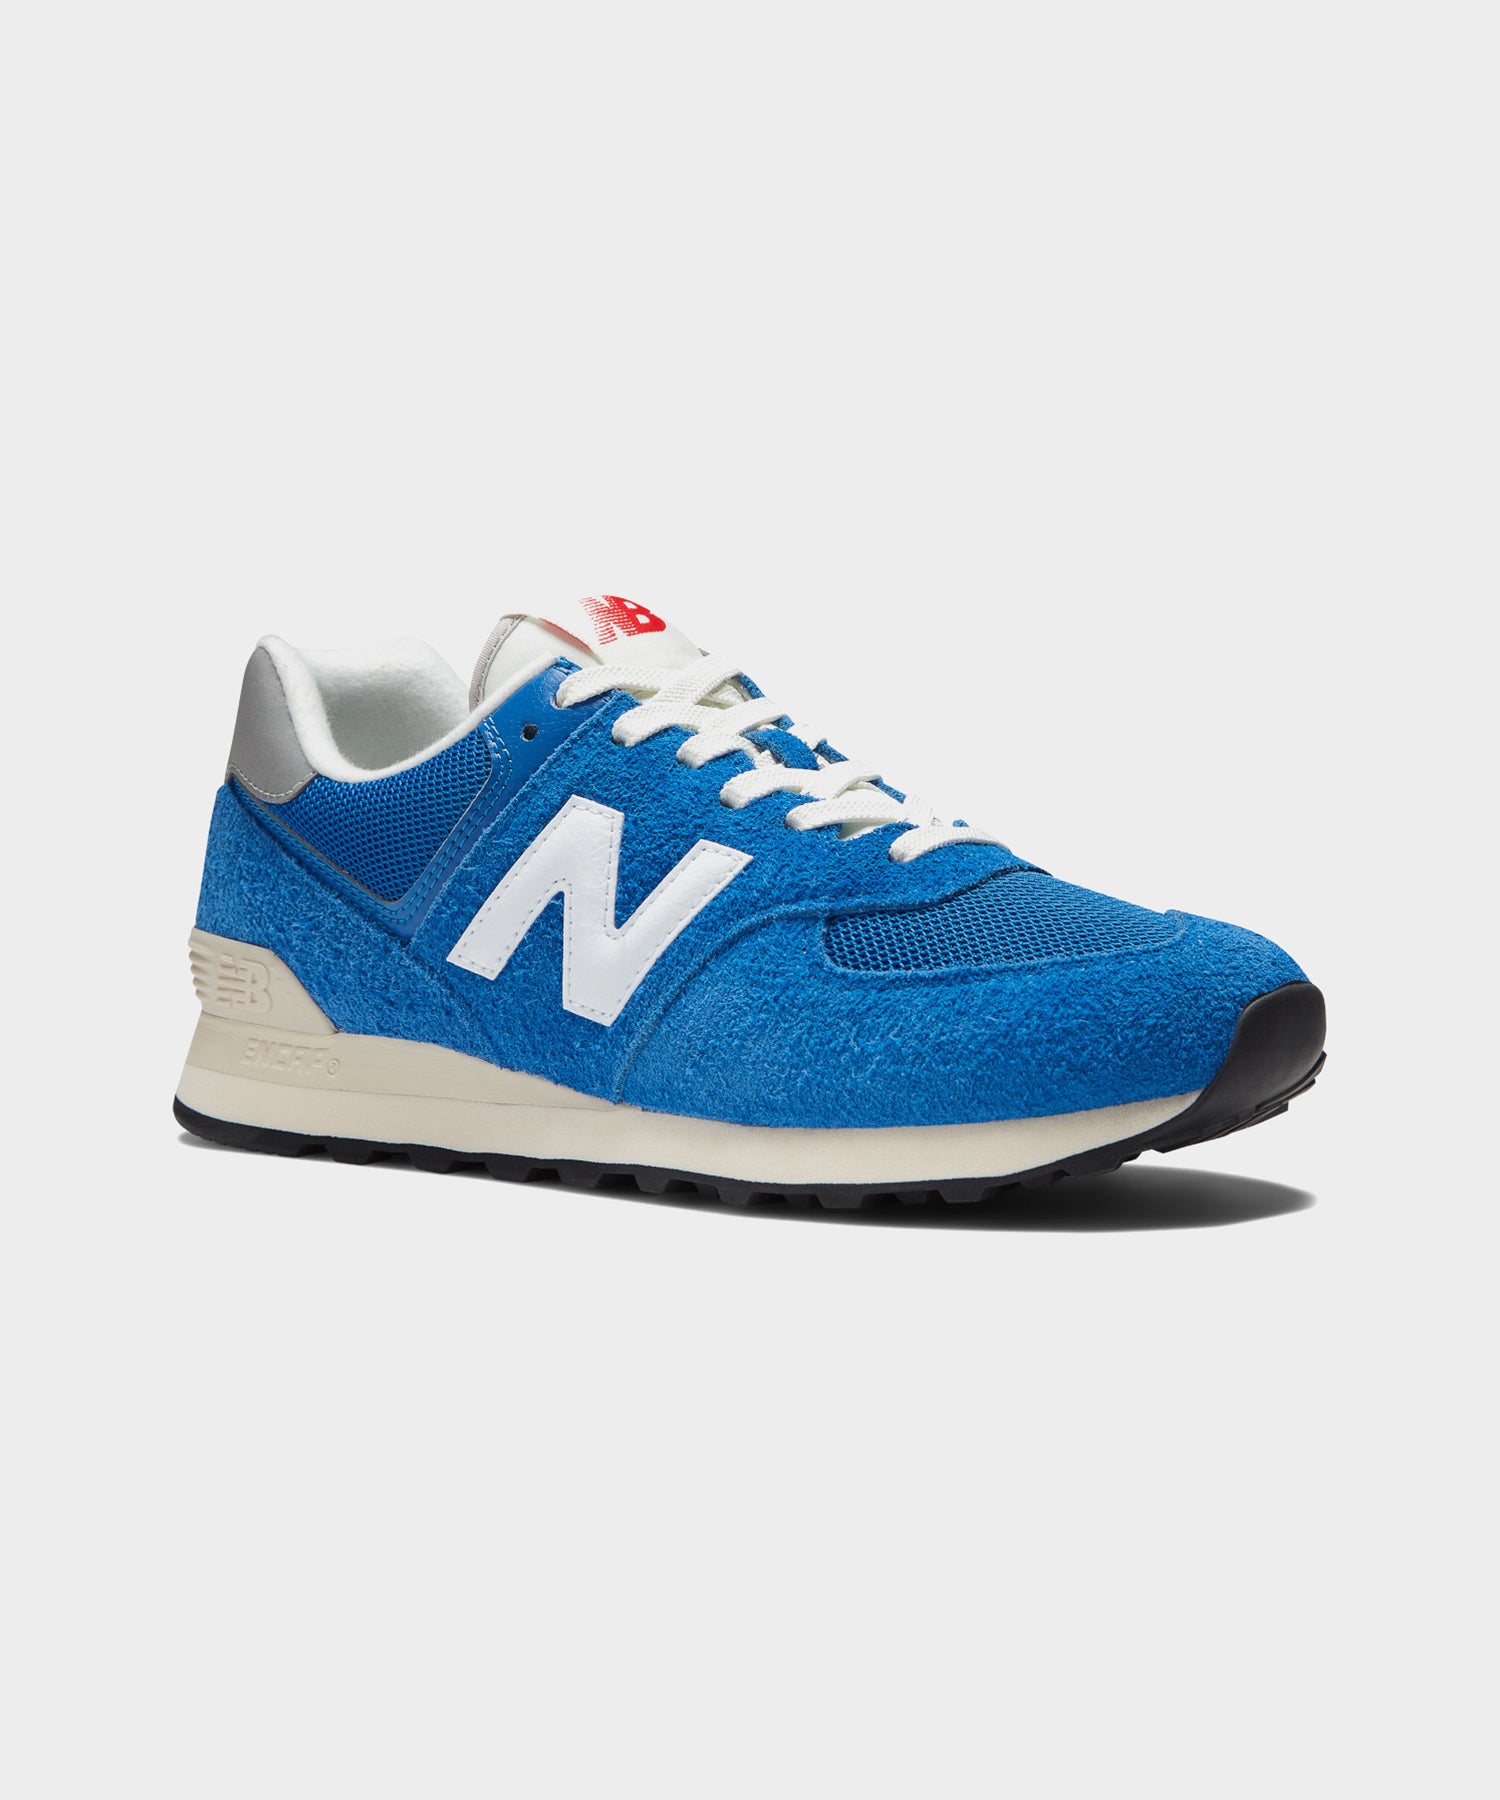 New 574 Blue with